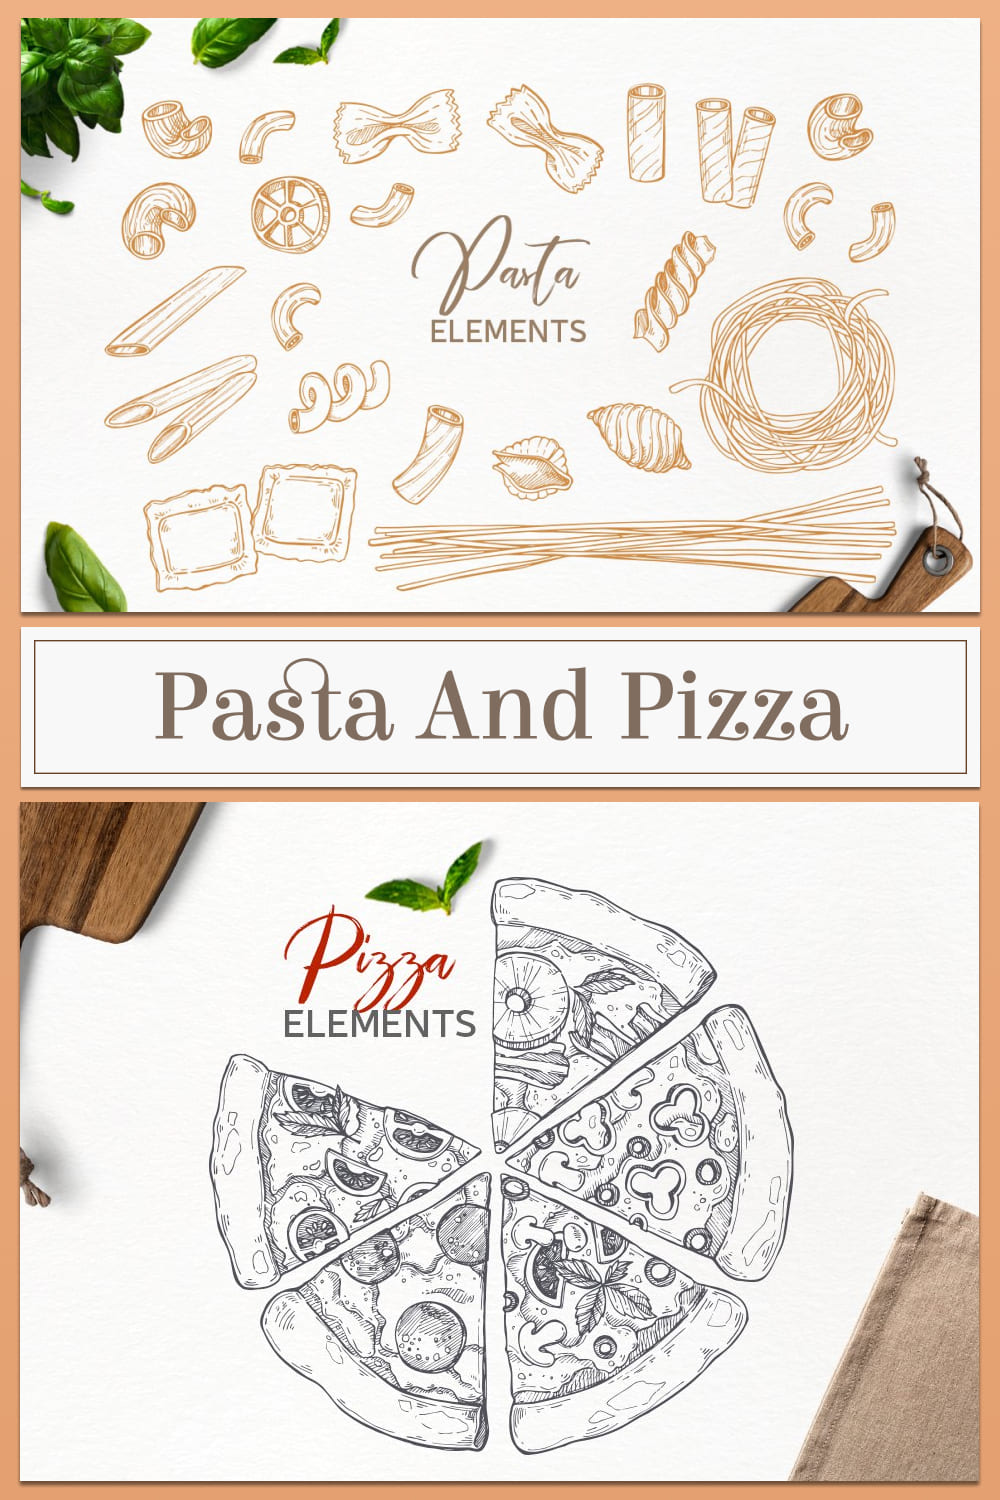 Pasta and pizza - pinterest image preview.